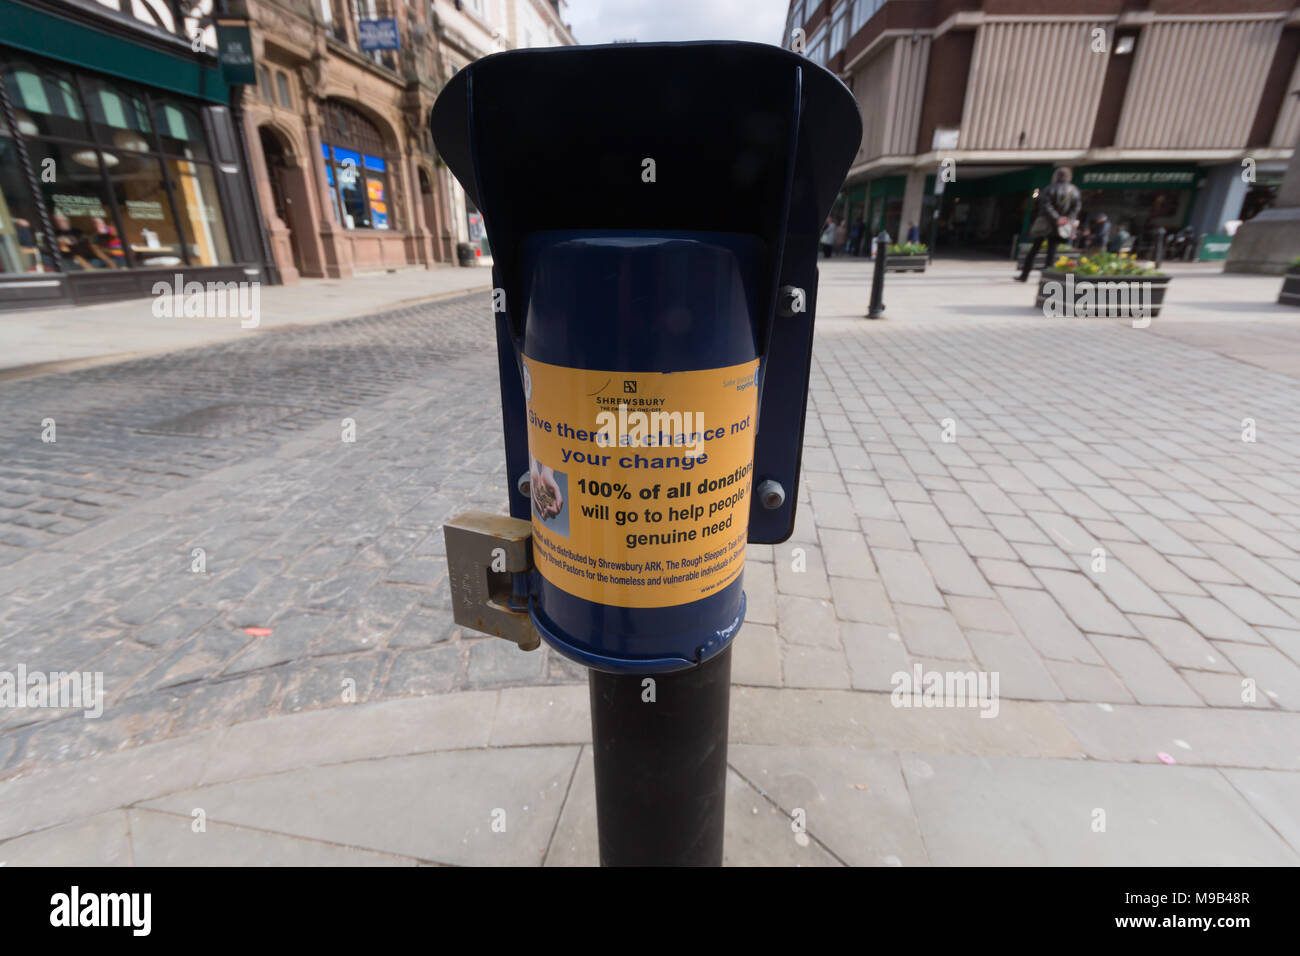 Street donation box for the Shrewsbury ARK operated by the Shrewsbury Christian Association (SCCA) in Shropshire to provide assistance to the homeless Stock Photo